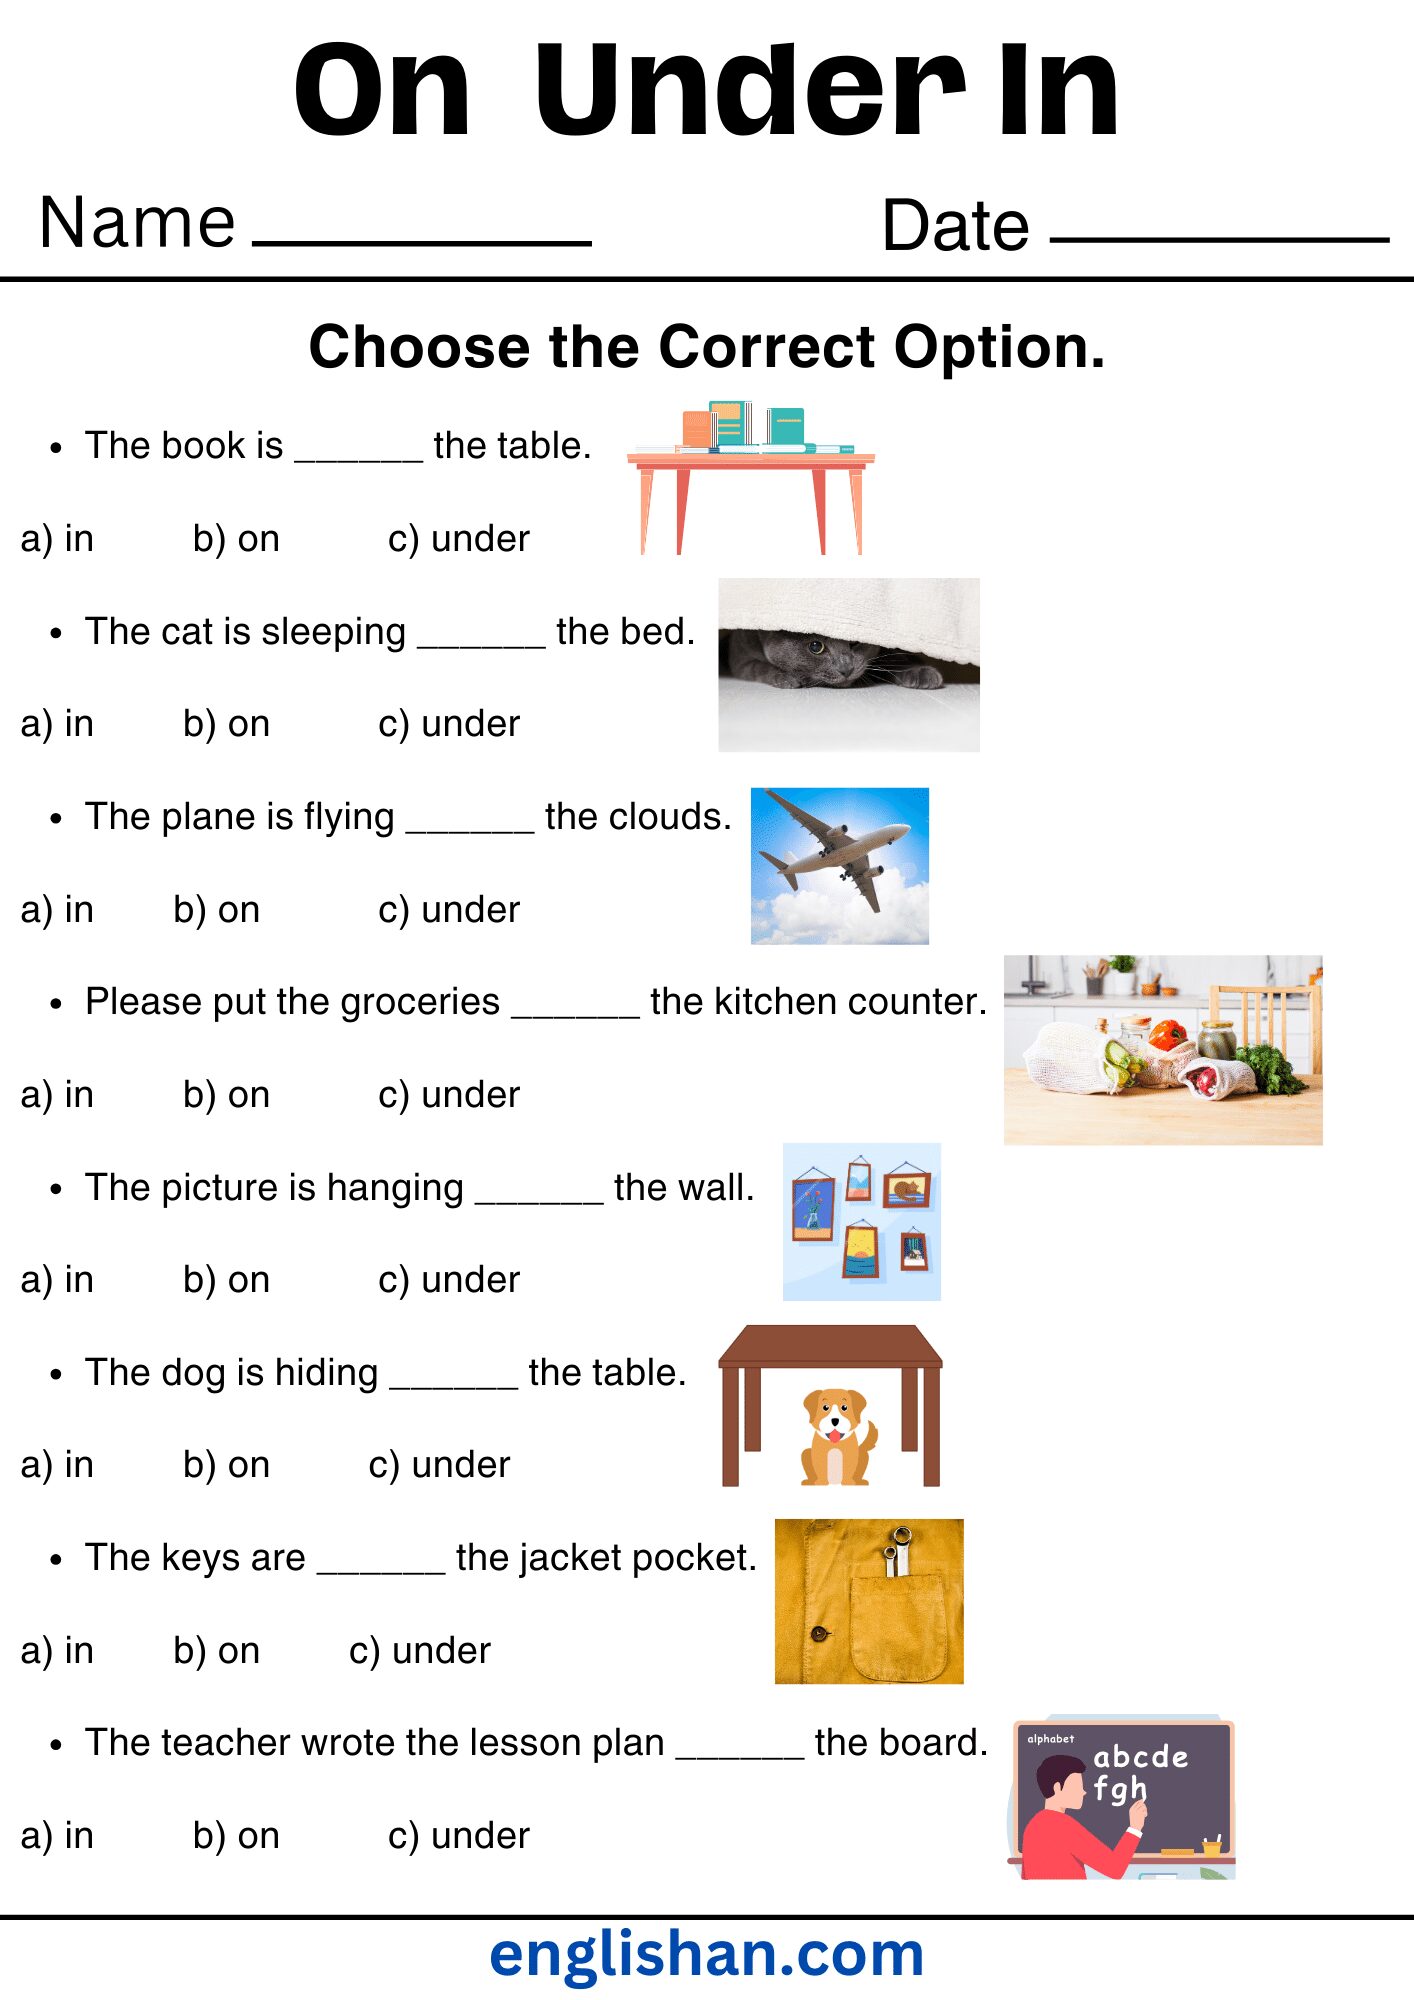 On Under In Worksheets. 15+ Mcqs of In/On/Under Worksheets. Choose the Correct Option.